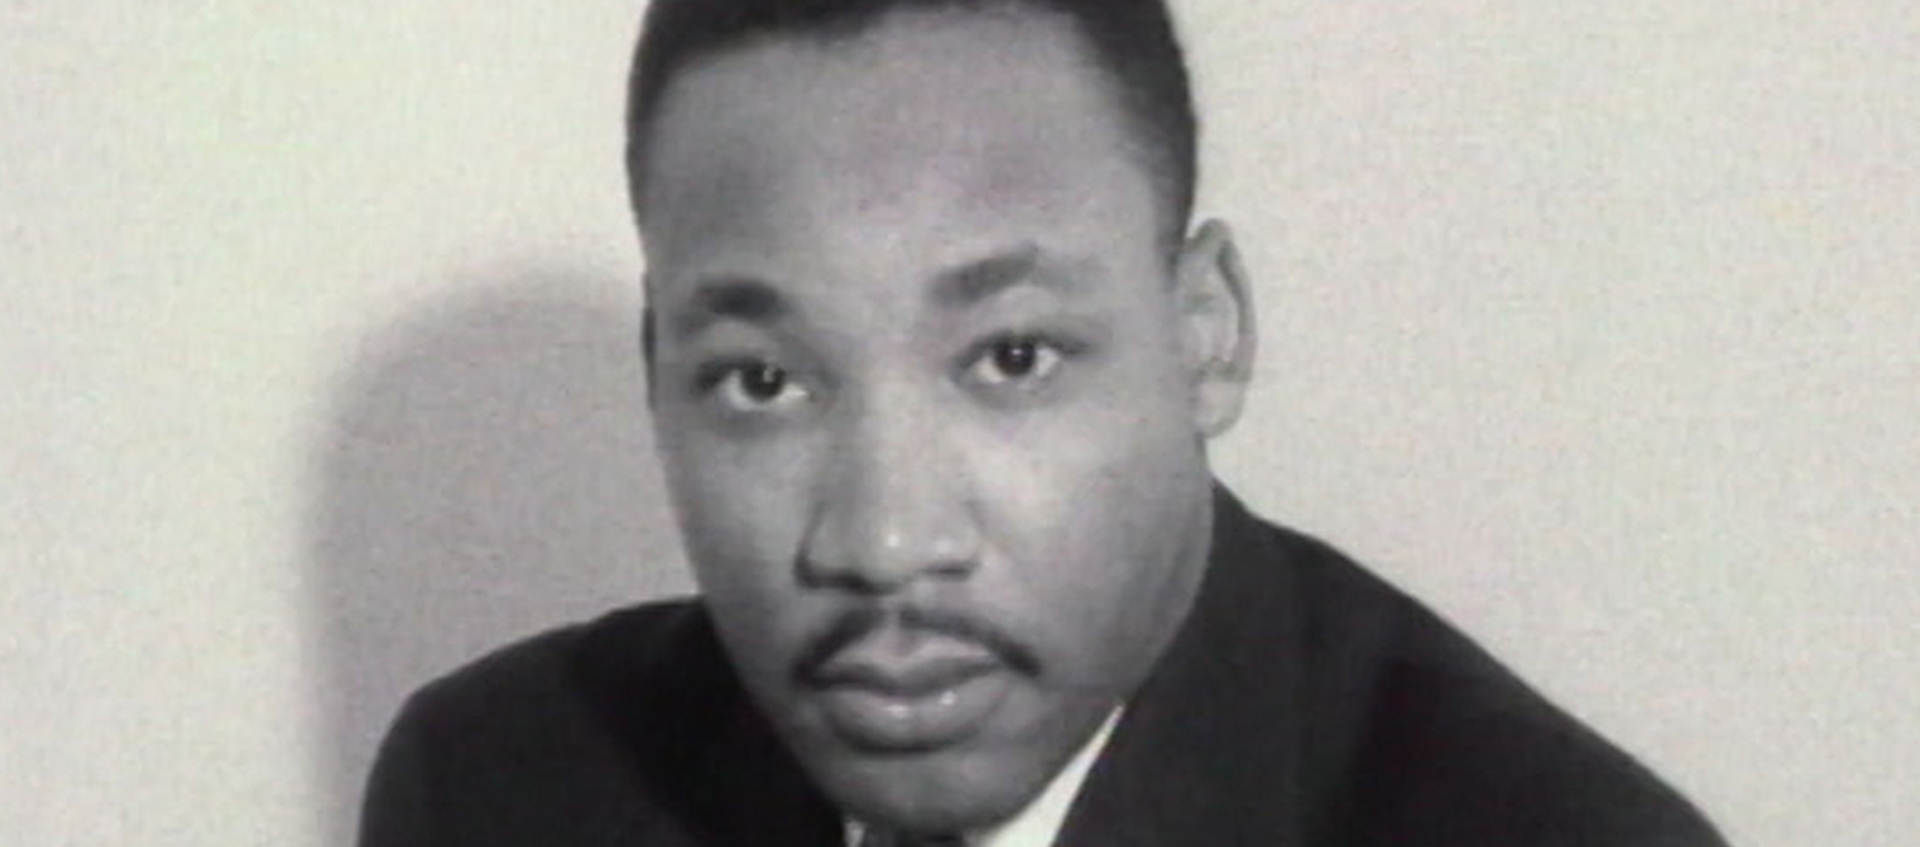 Black & white photo of Martin Luther King, Jr. looking at the camera